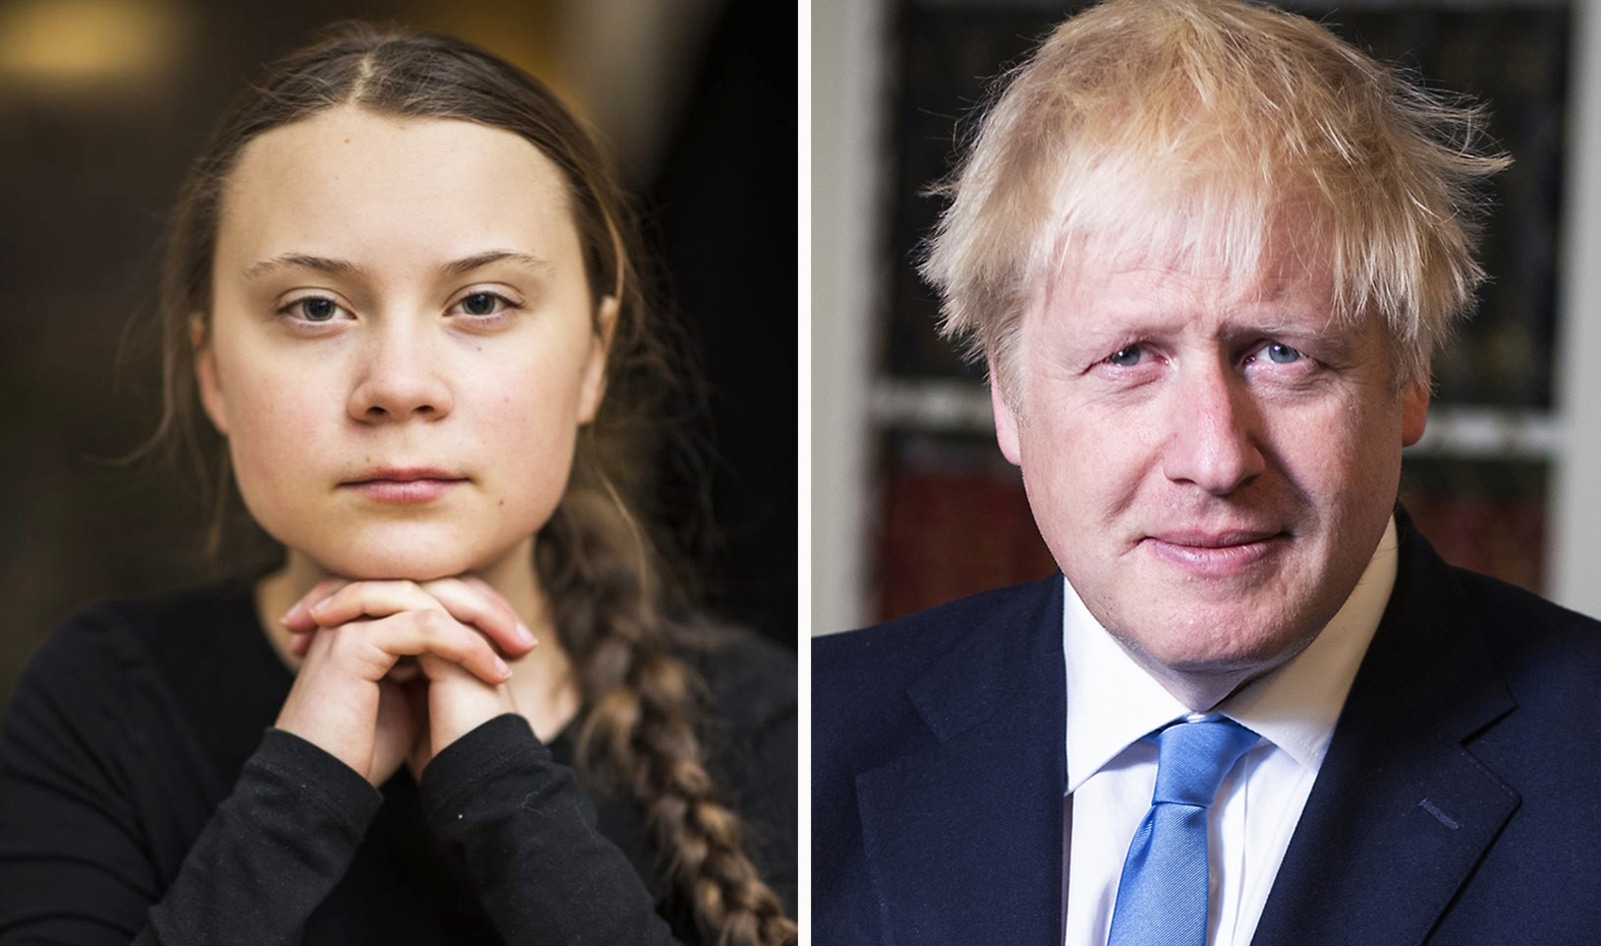 Greta Thunberg Calls Out Hypocrisy of World Leaders for Eating Steak and Lobster at Climate Summit